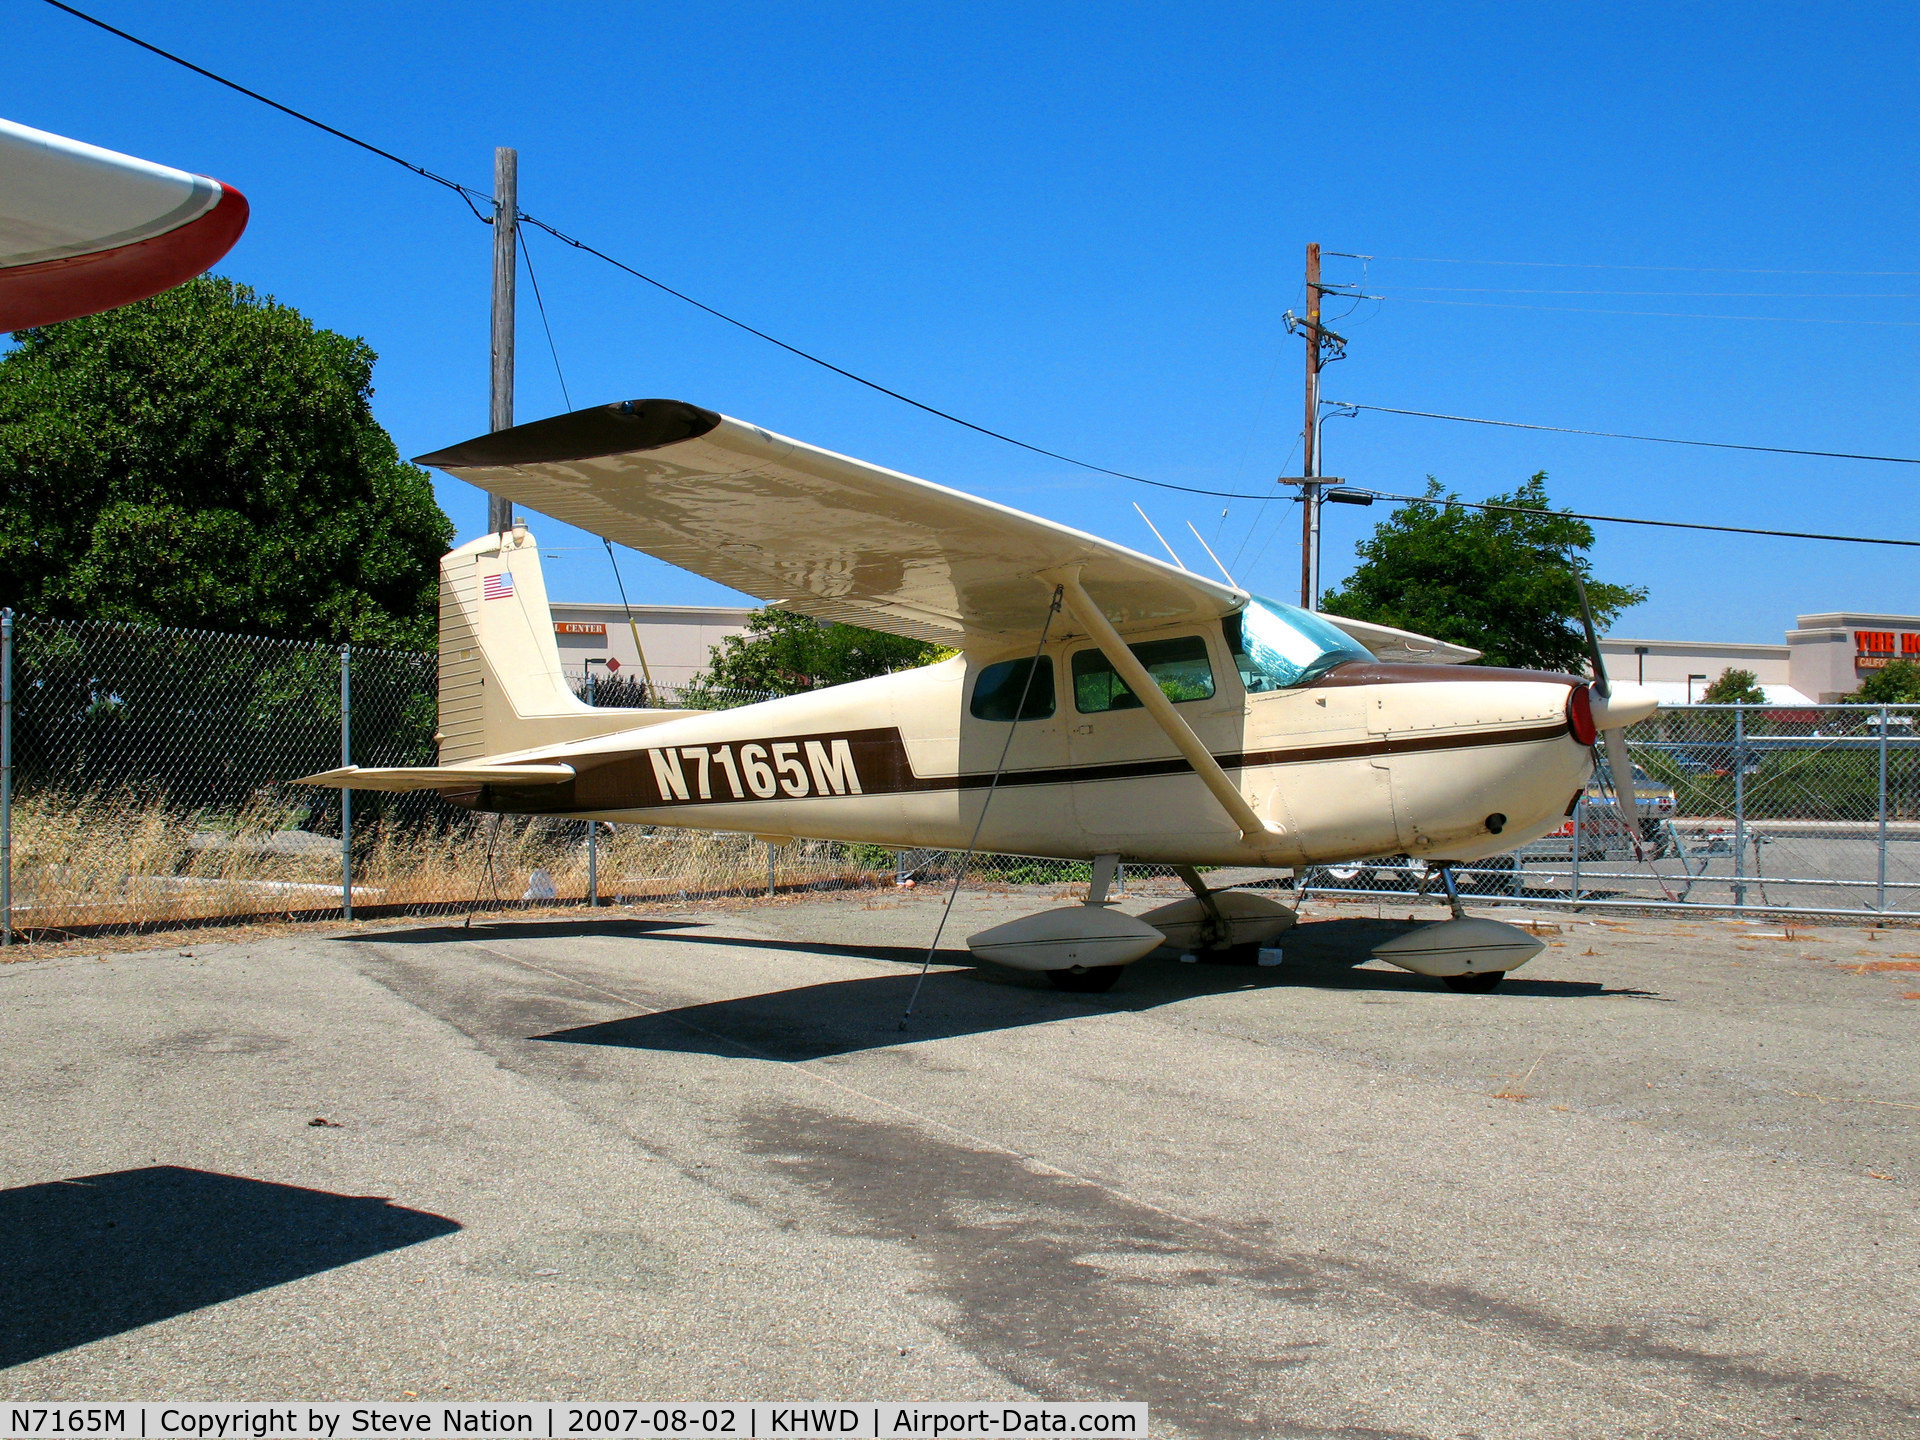 N7165M, 1958 Cessna 175 Skylark C/N 55465, Straight-tail 1958 Cessna 172 for sale at Hayward, CA (now based in Sandpoint, ID)